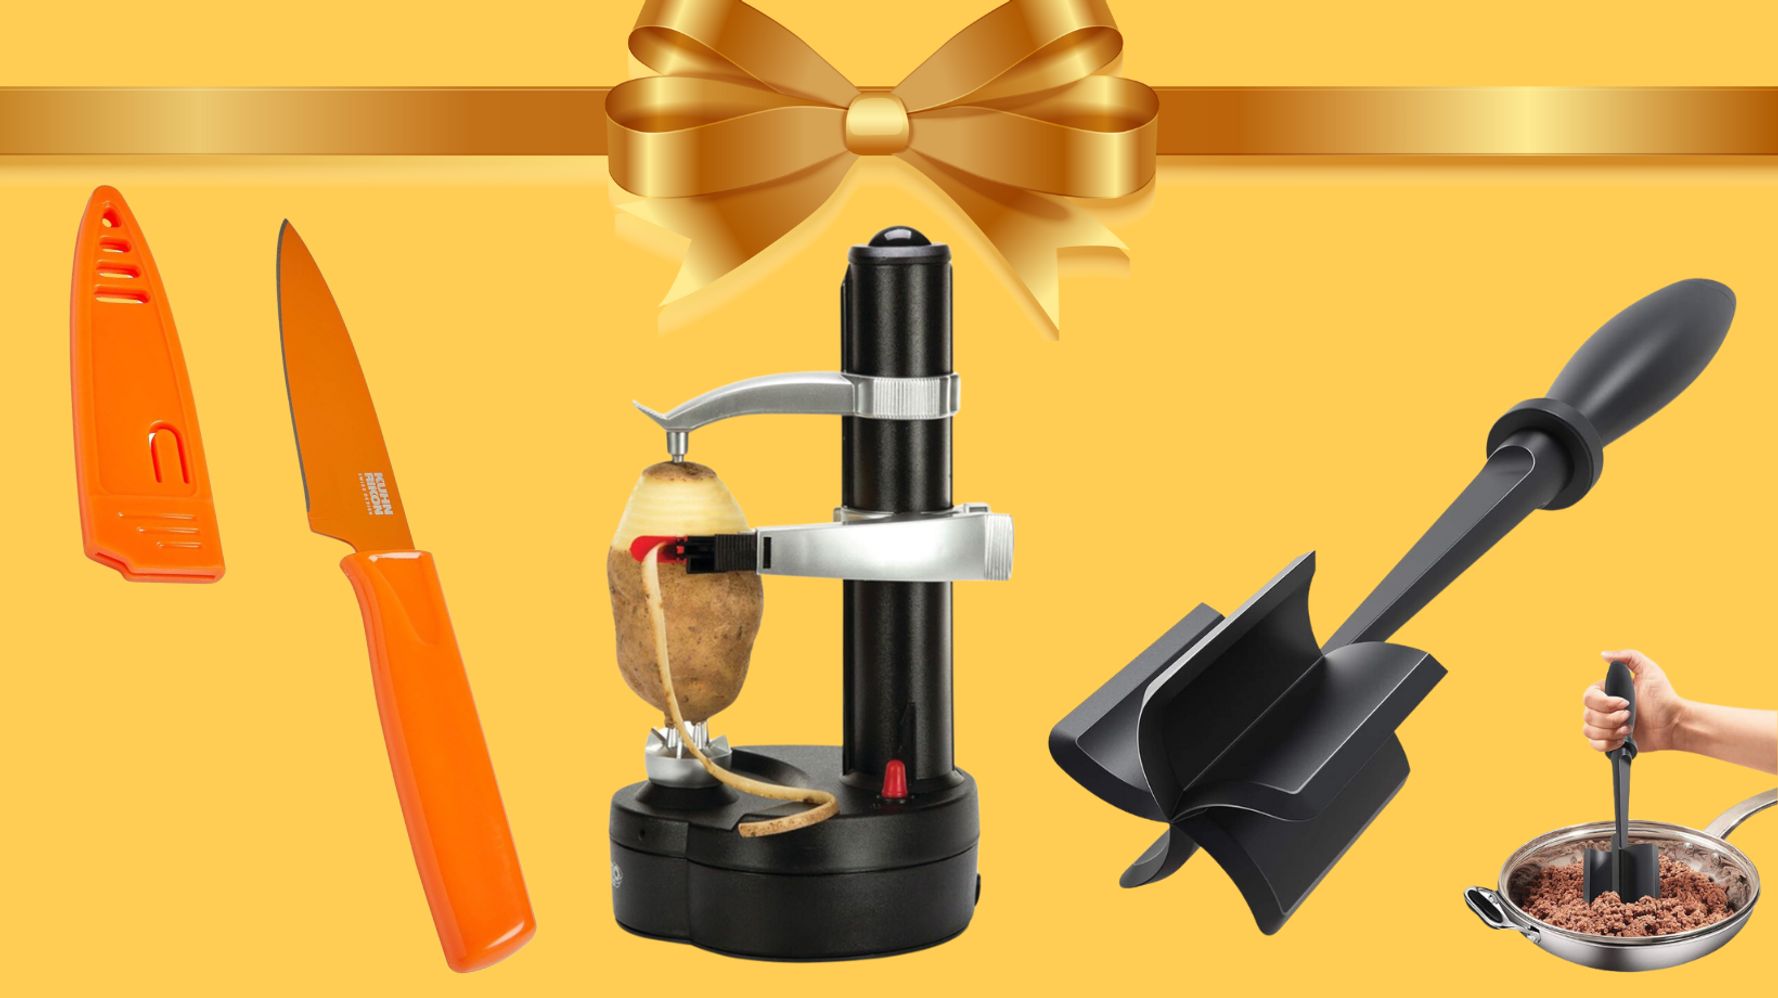 20 Kitchen Gift Ideas- Gift Guide for Busy Home Cooks